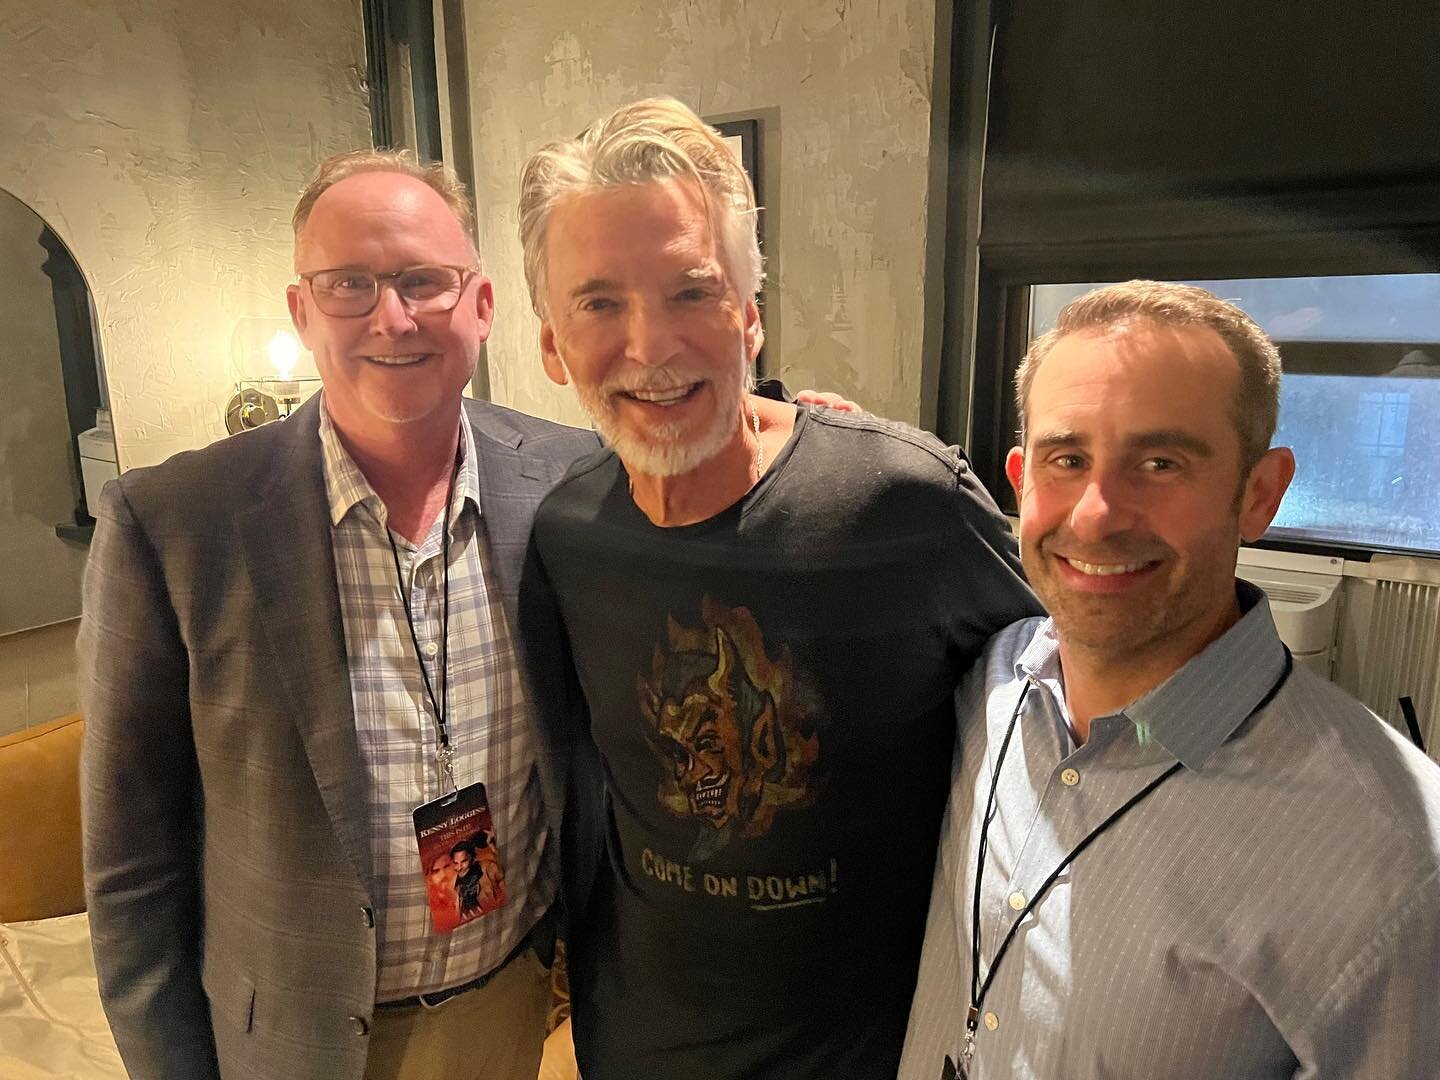 Chris Burke and Jeff Howard backstage after a sold-out show with Kenny Loggins at Beacon Theatre in NYC! What an awesome night!